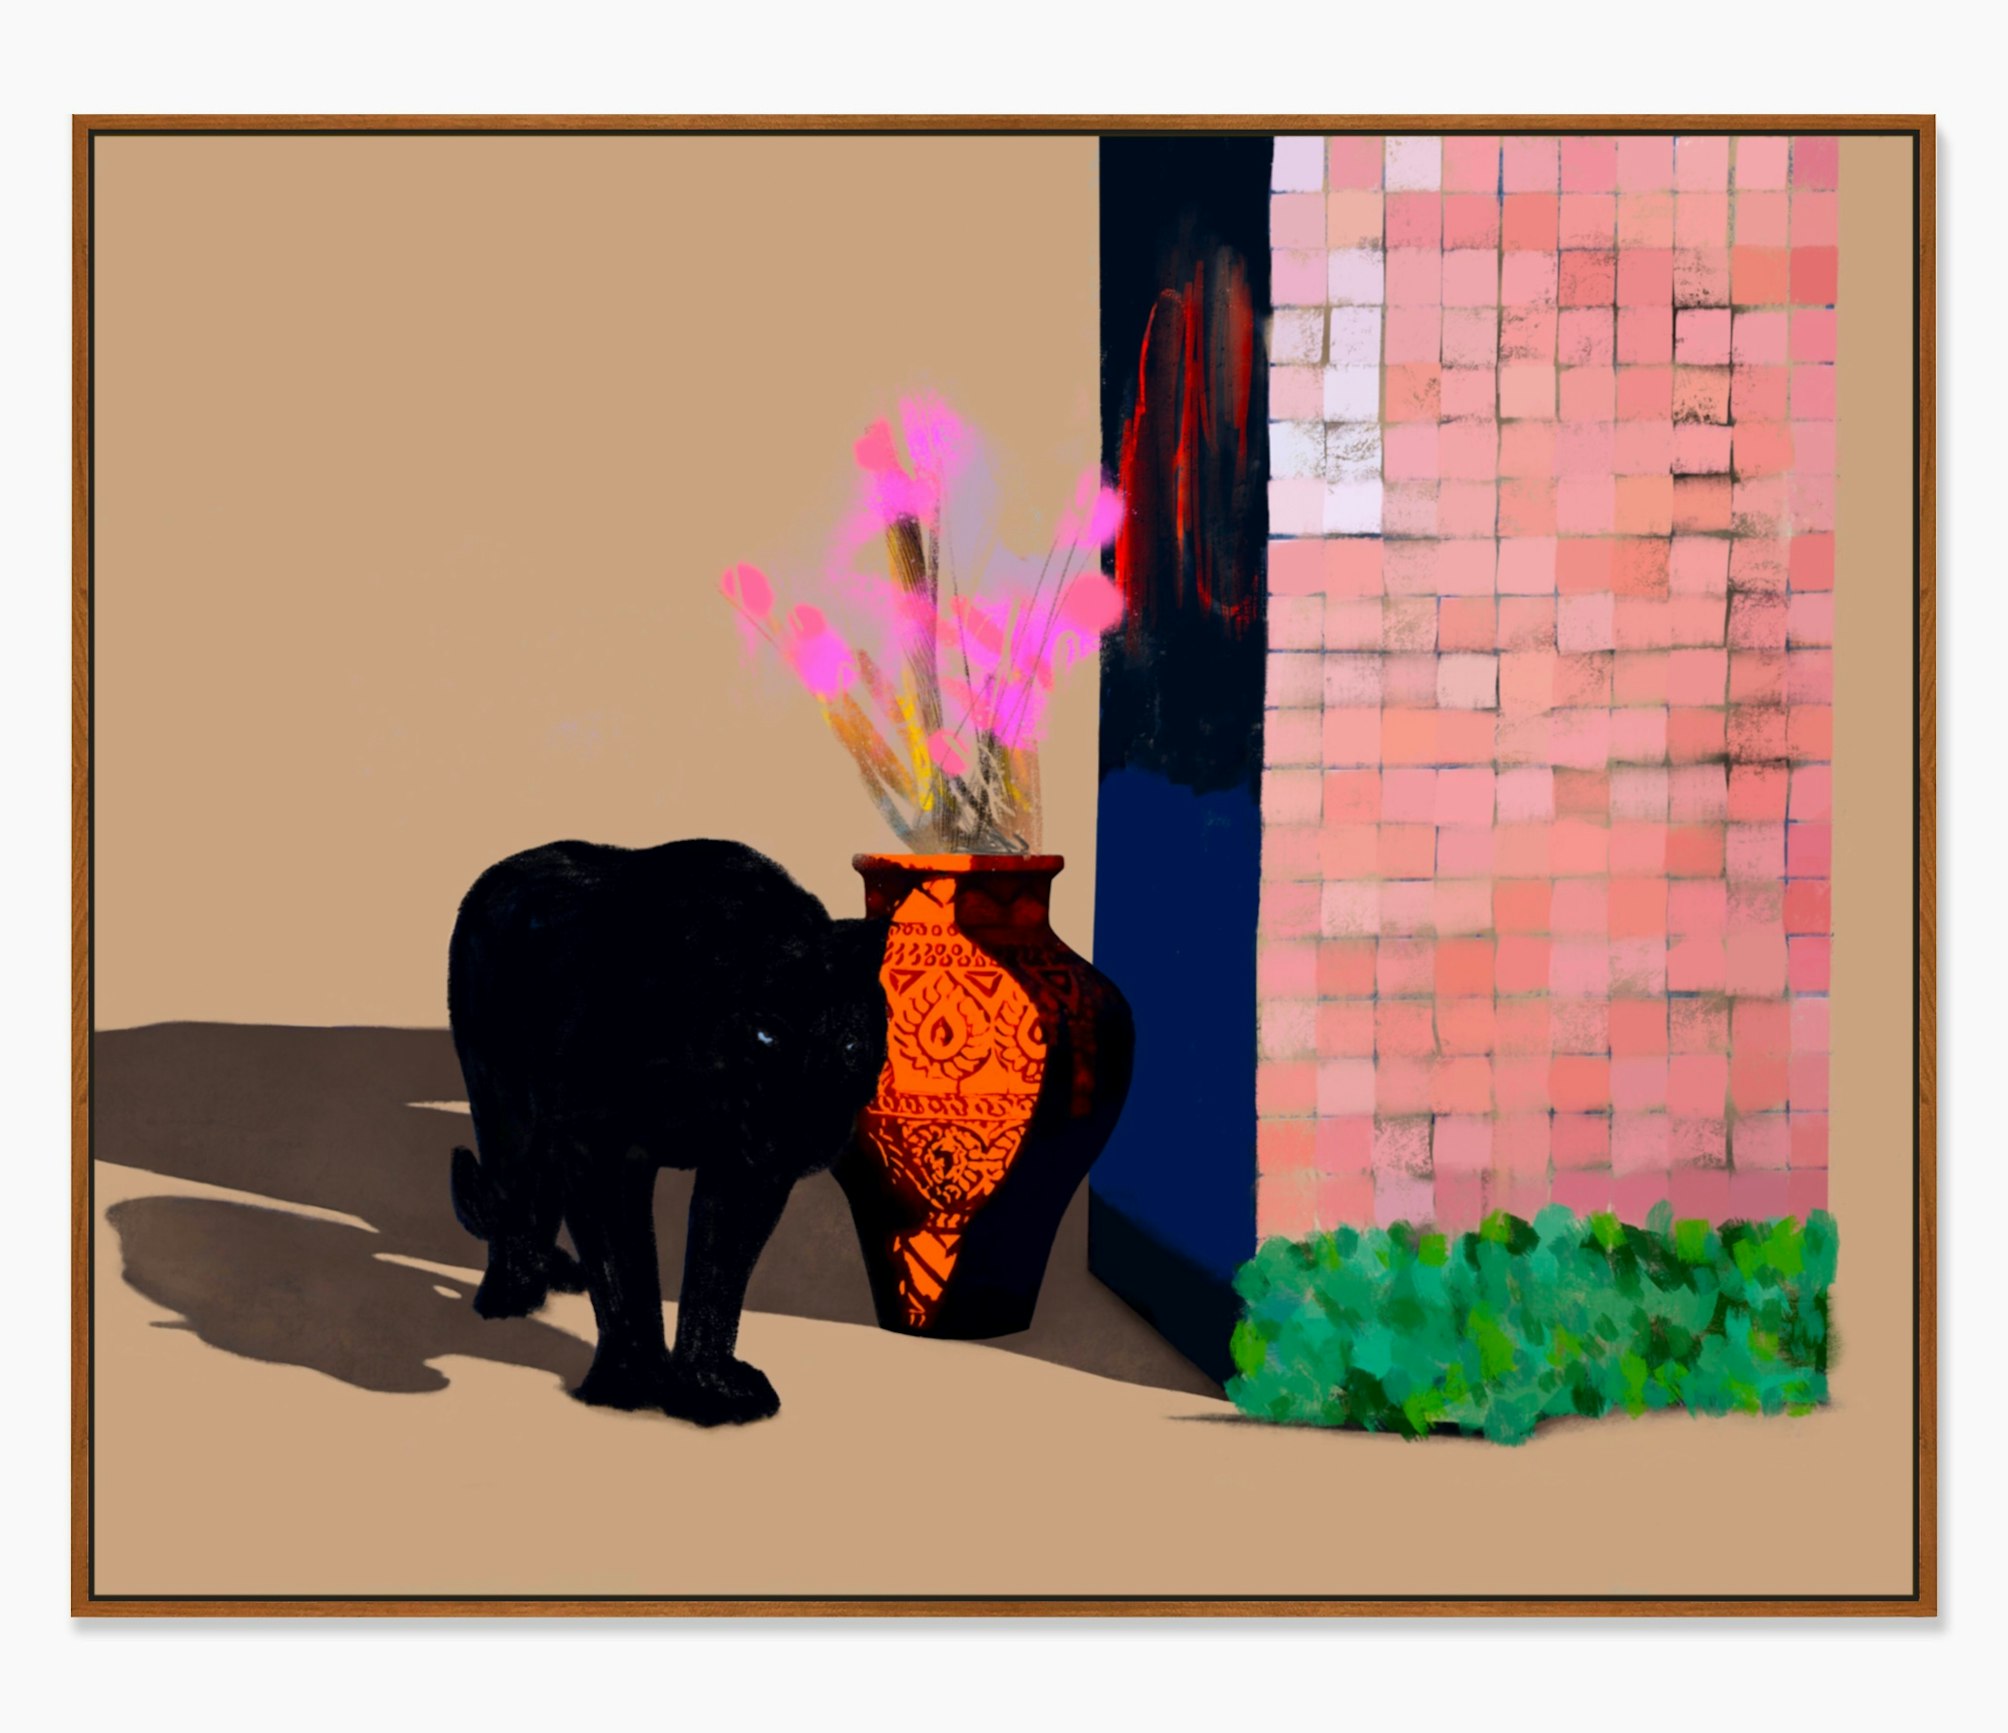 Black Panther of Orange Vase with Pink Flowers next to exposed brick wall